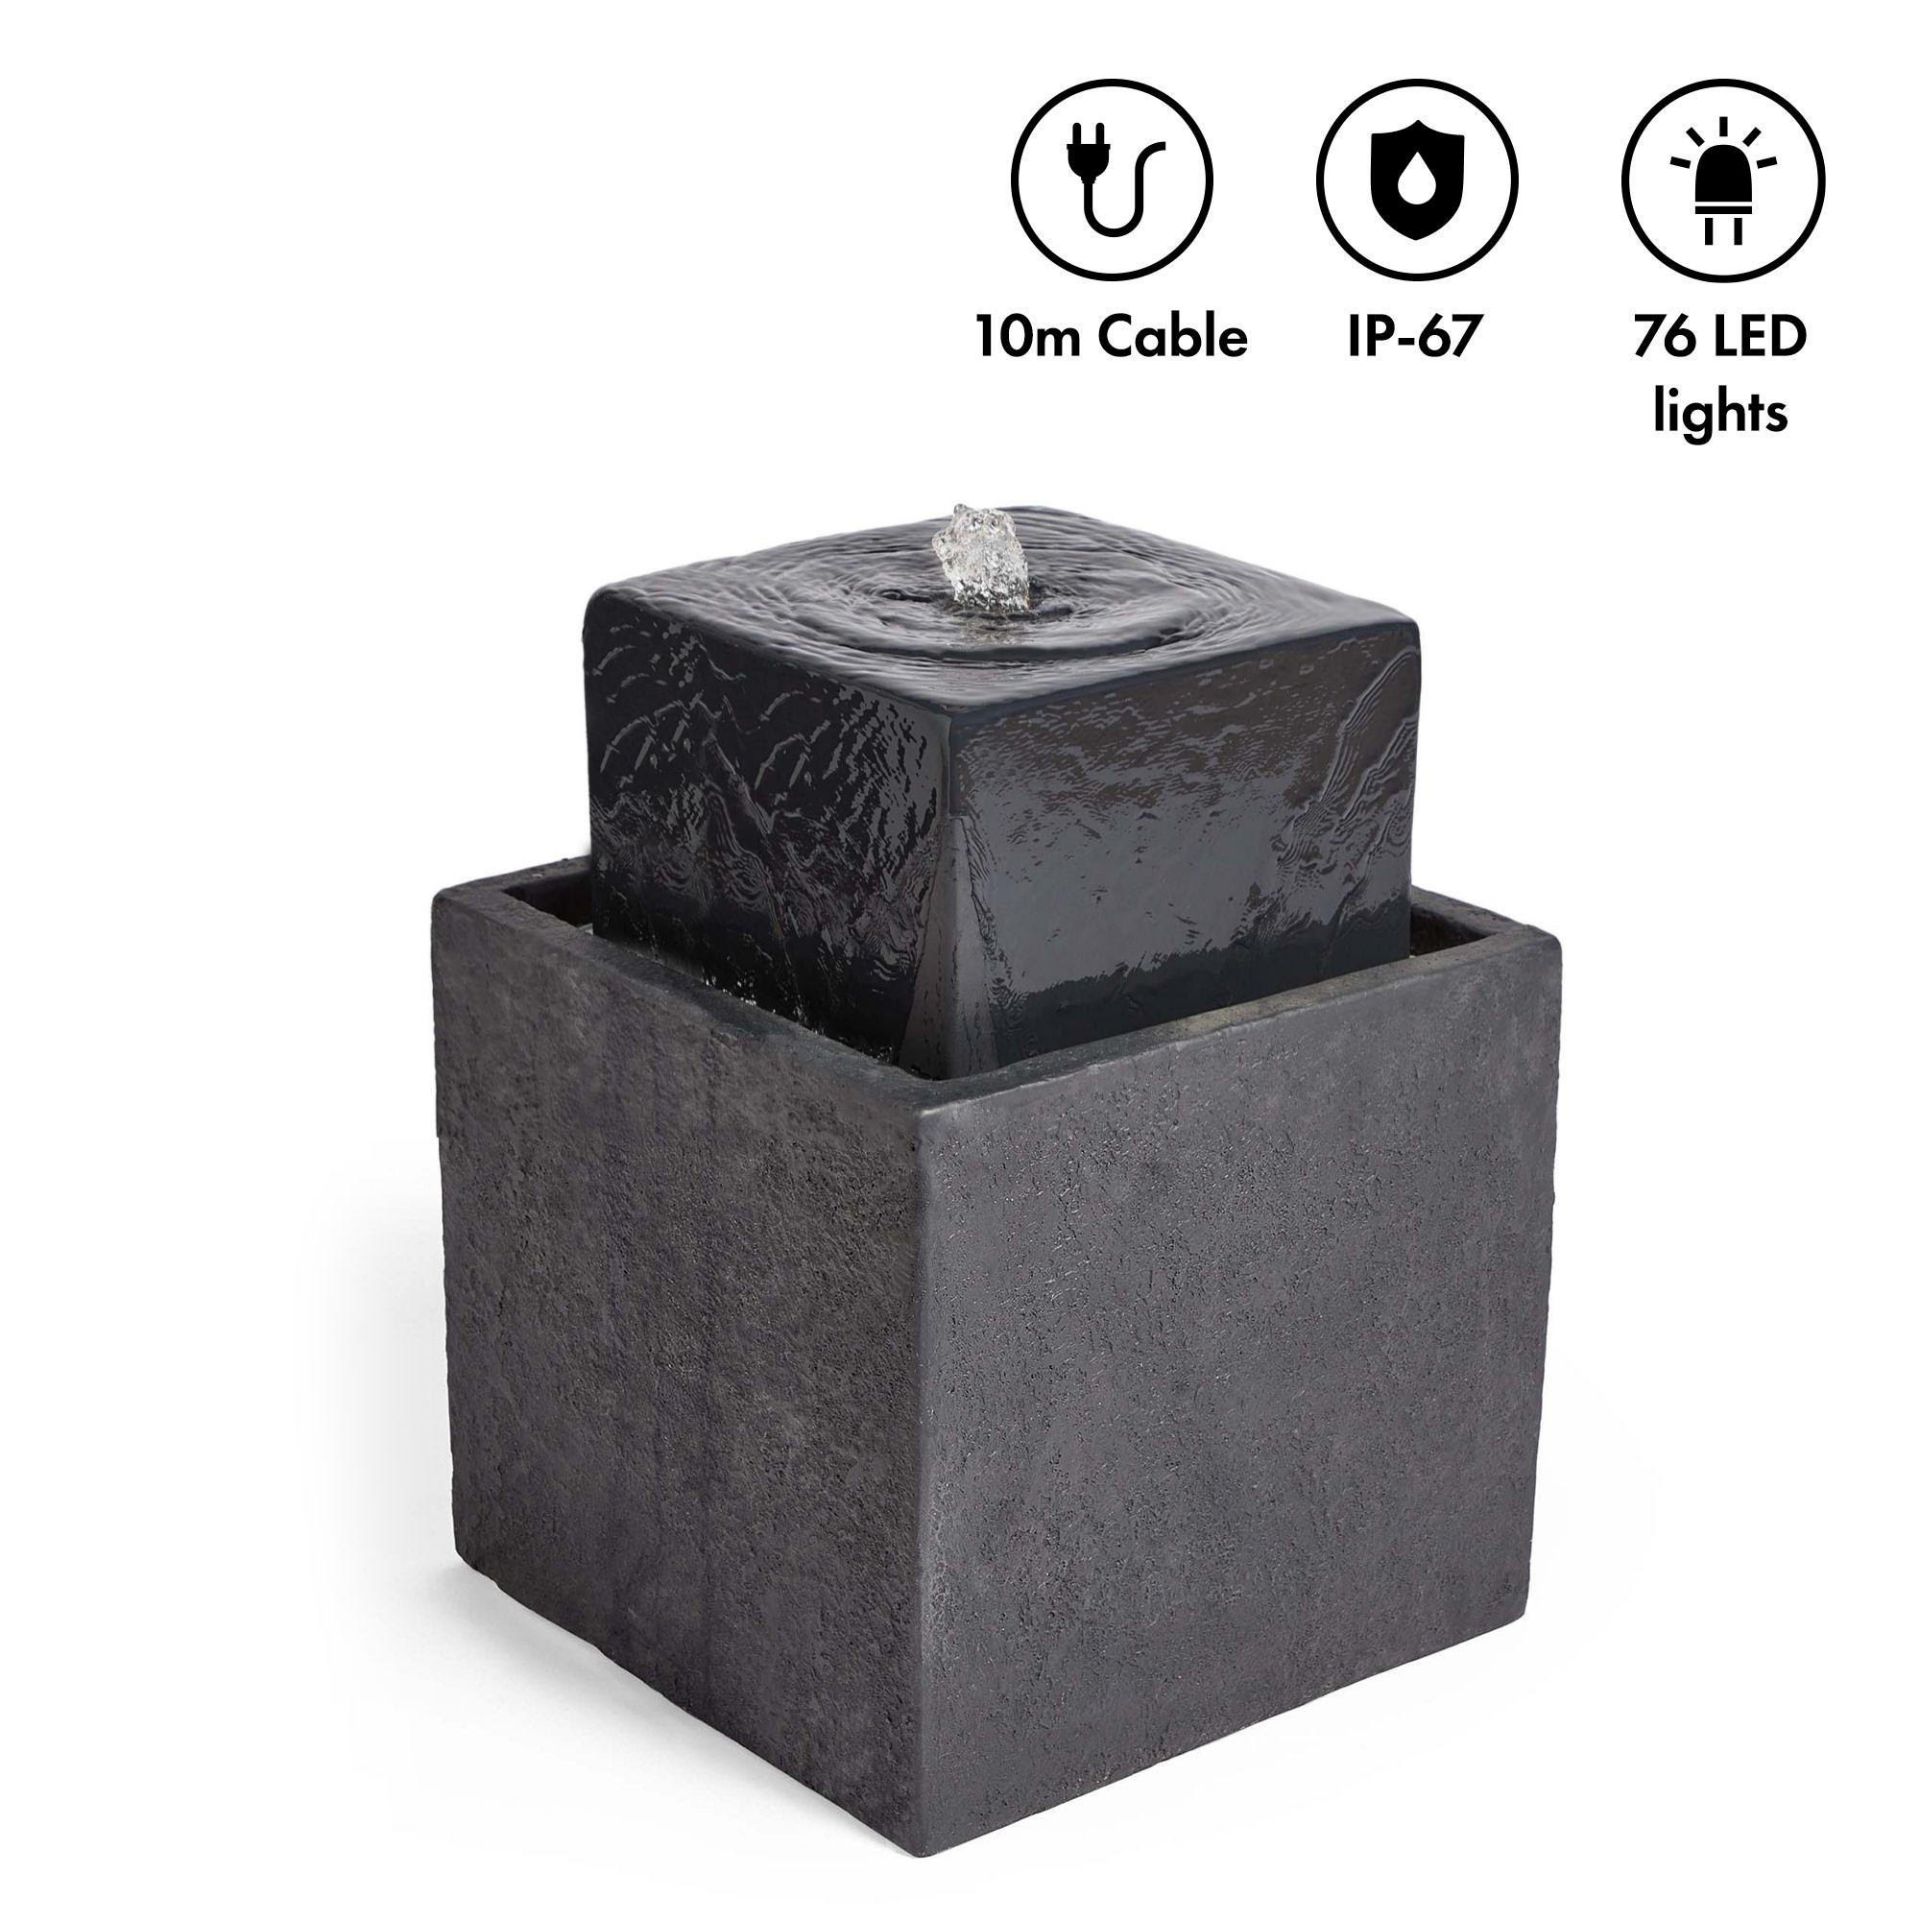 New & Boxed Square 2 Tier Water Feature. RRP £299.99. (REF671) – Indoor and Outdoor Cascading - Image 5 of 6